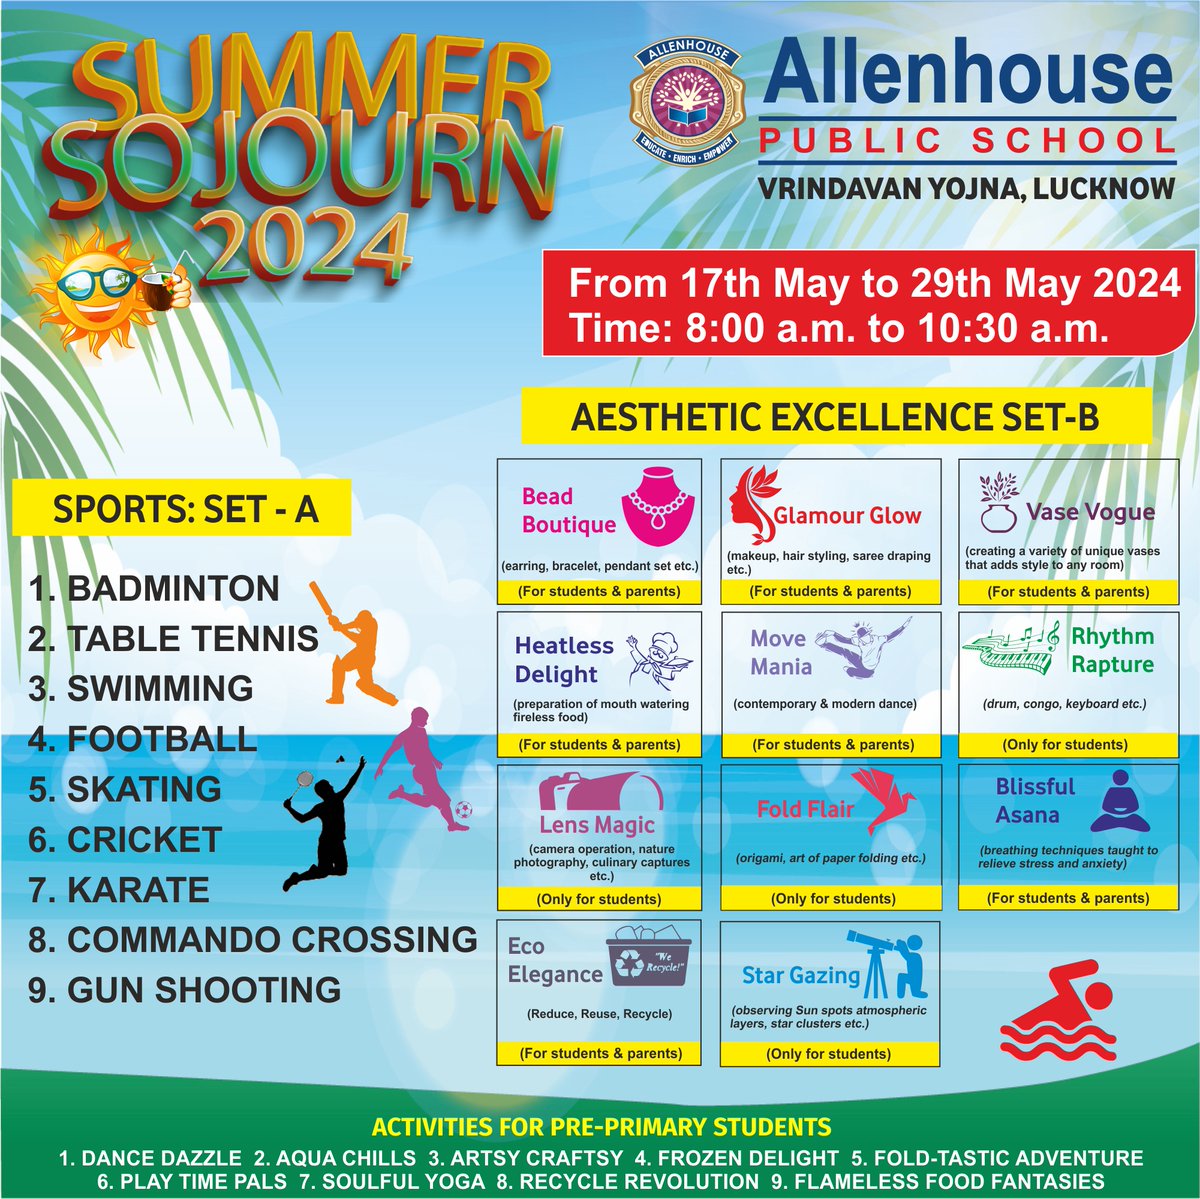 'Exciting adventures await! Join us for Allenhouse Public School's Summer Sojourn from May 17th to 29th. #SummerSojourn2024 Coming Soon! Register Now!'
#AllenHousePublicSchool #allenhousepublicschoollucknow #Allenhousegroup #bestschoolinindia #BestCBSESchoolinup #admissionsopen